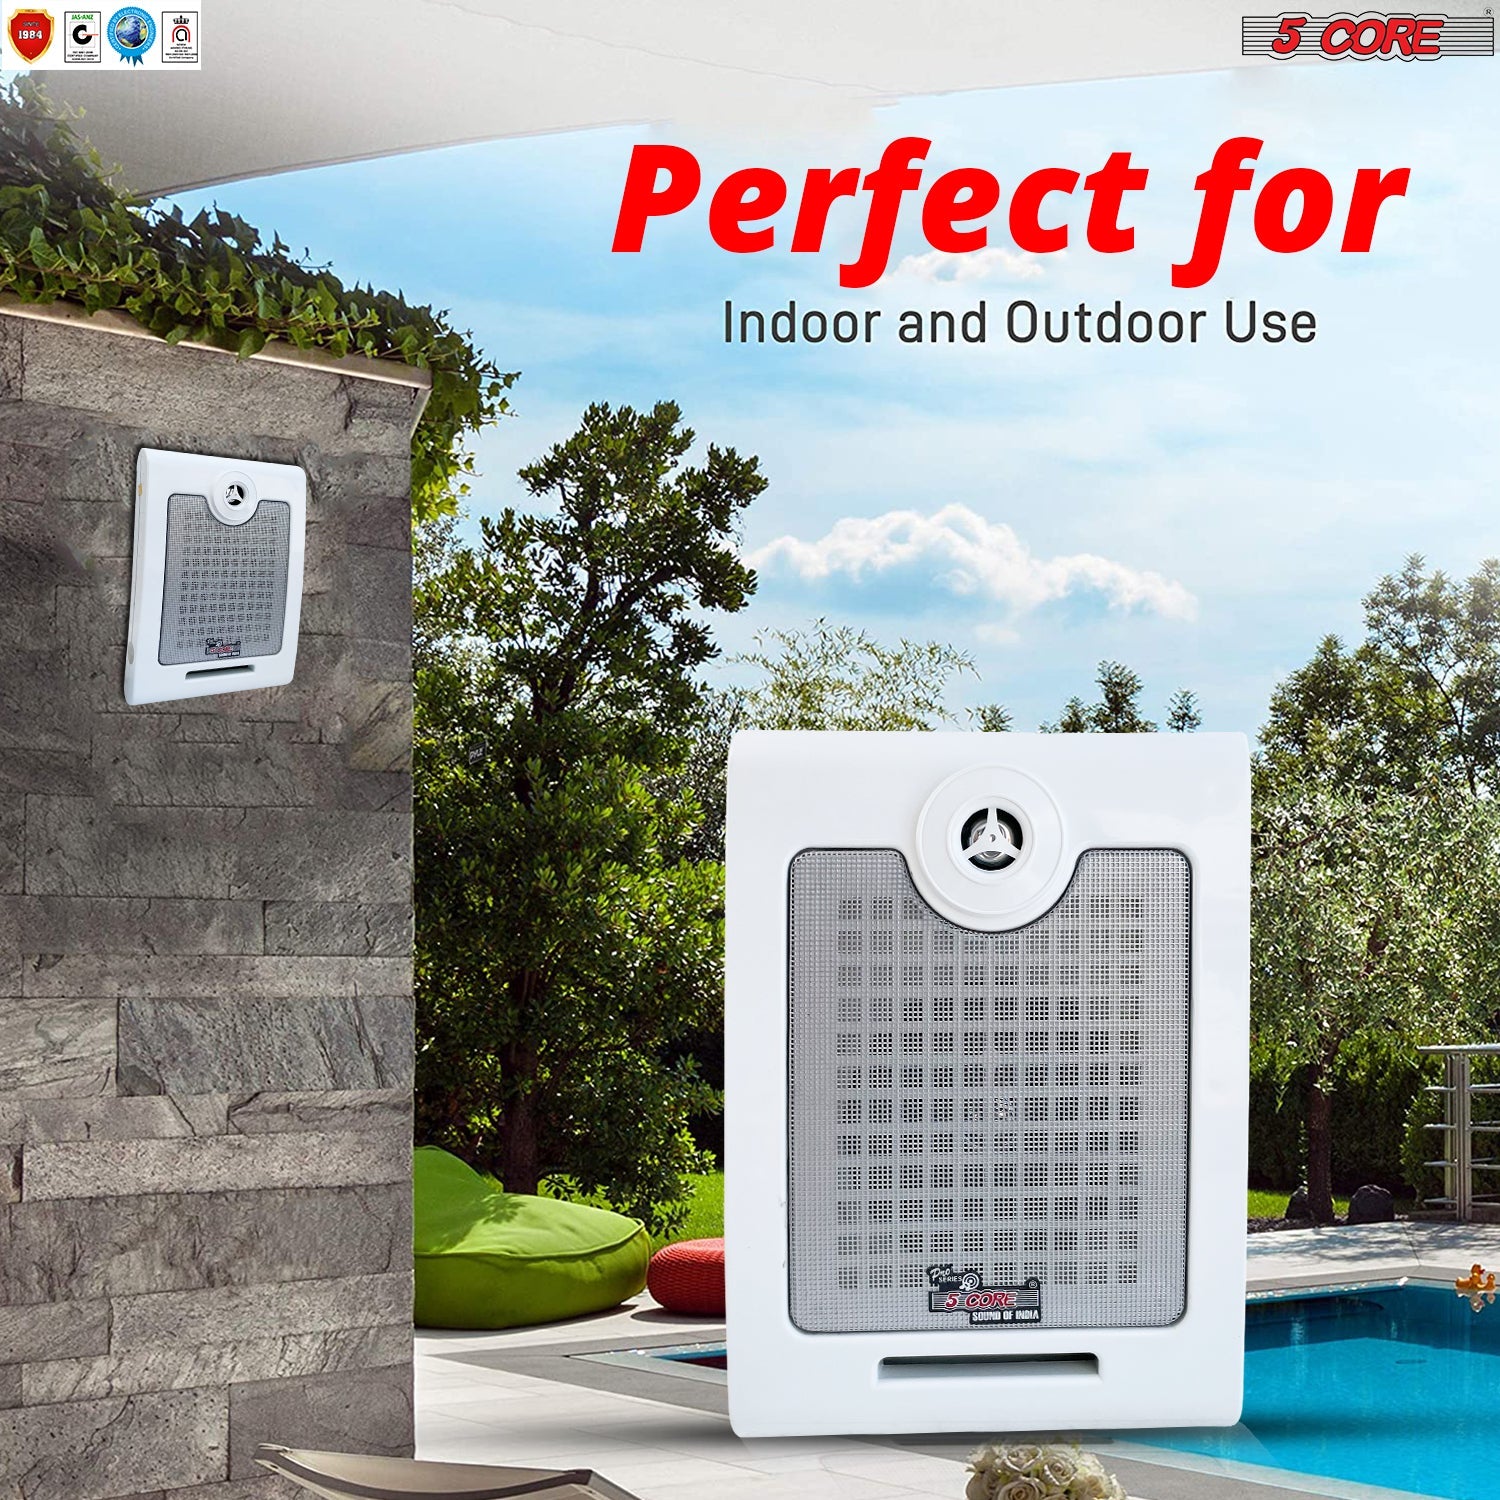 5Core Outdoor Wall Speakers High Performance Ceiling Mount Speaker 50W RMS, 4Ohms